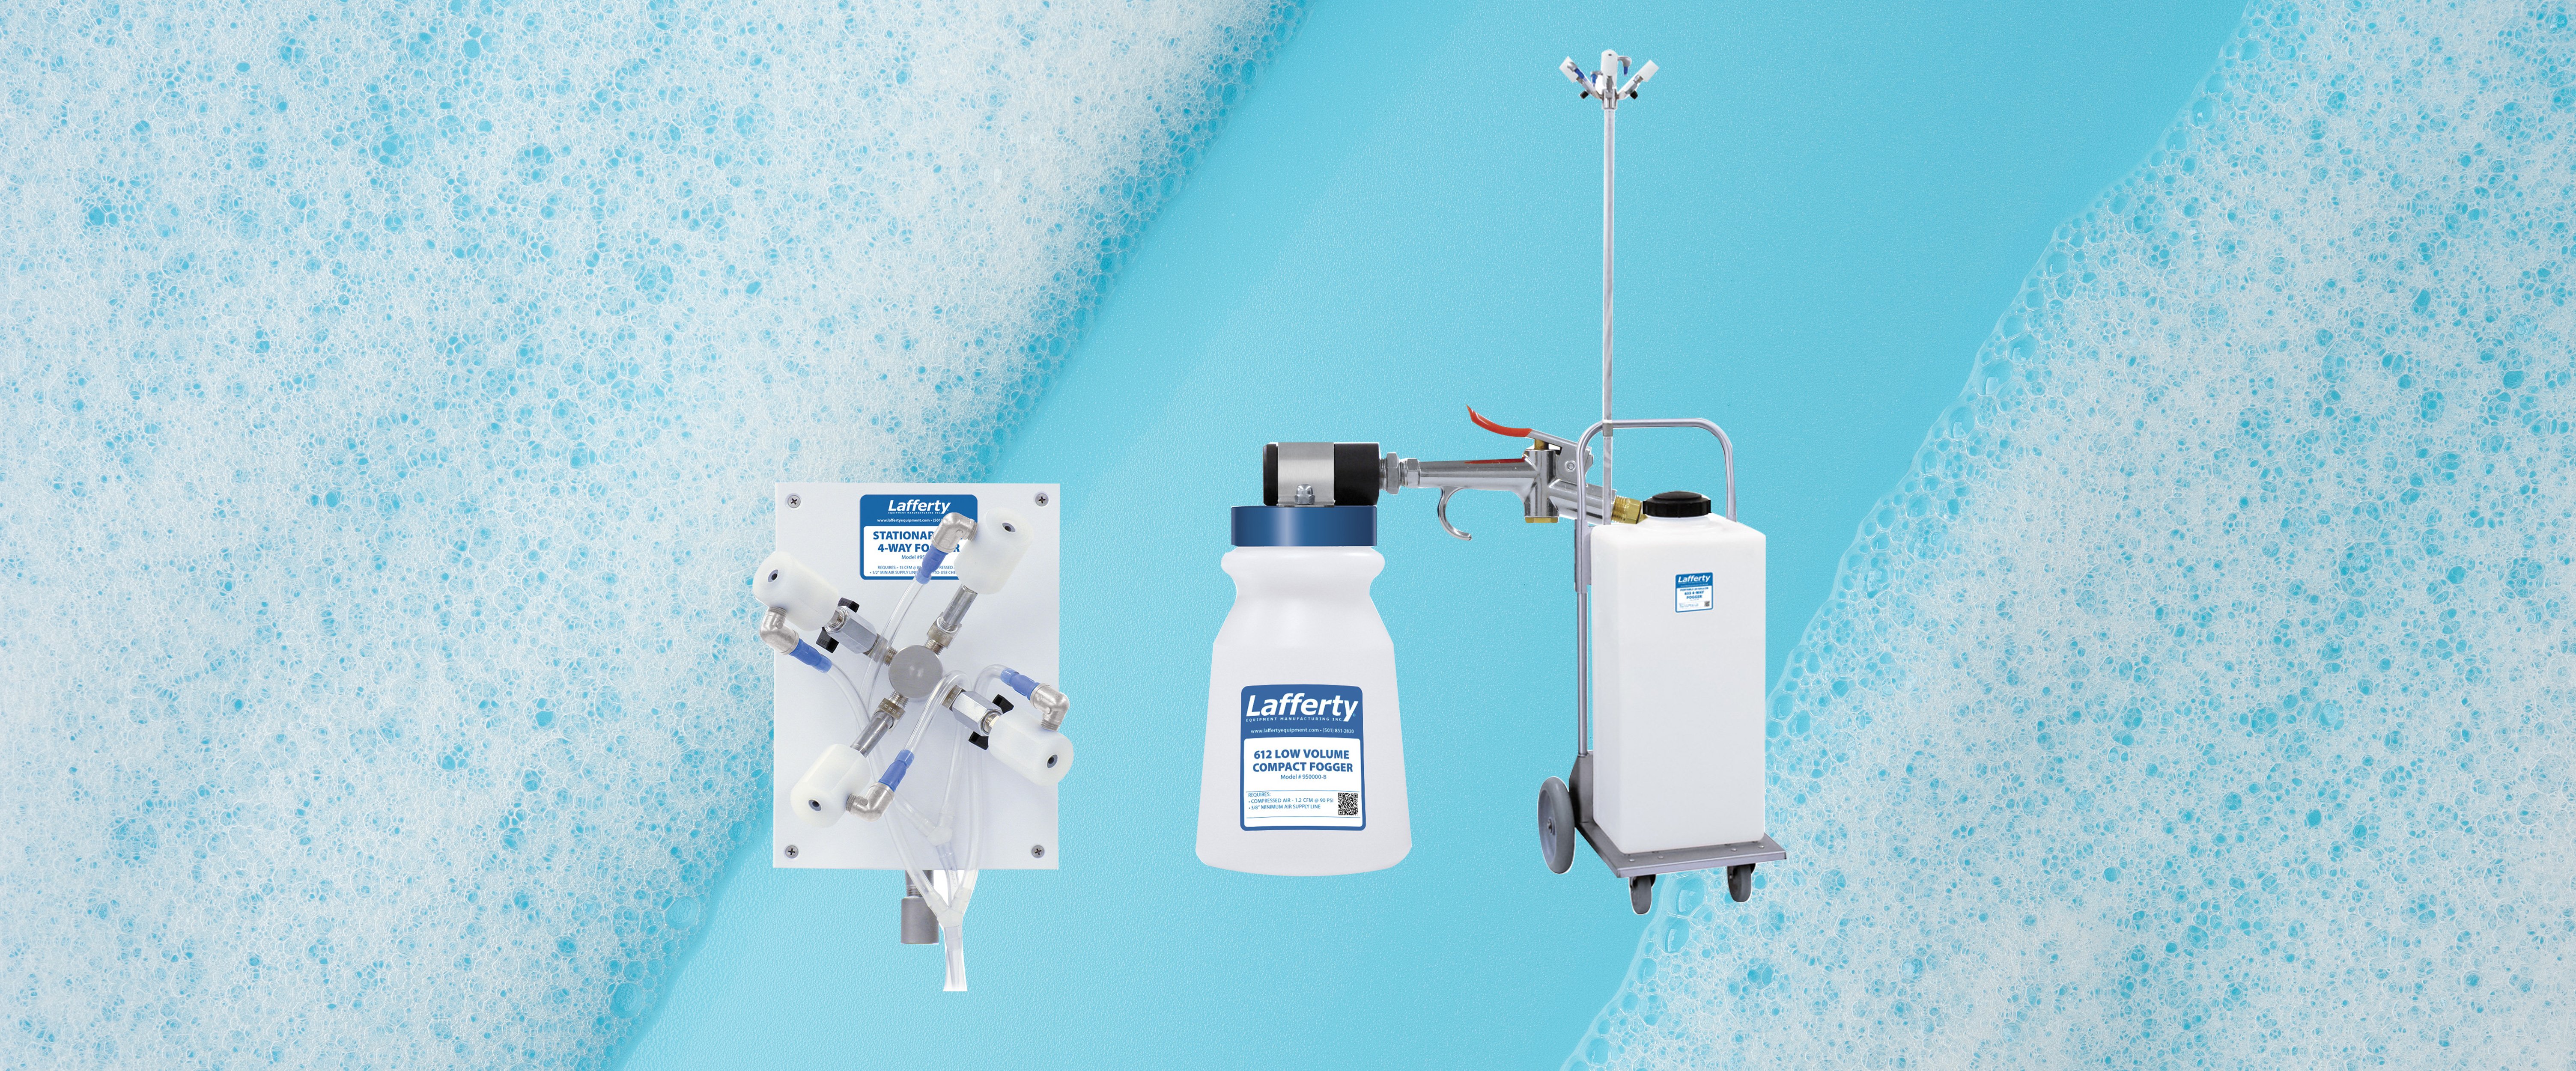 Lafferty sanitising and foaming equipment - disinfectant system